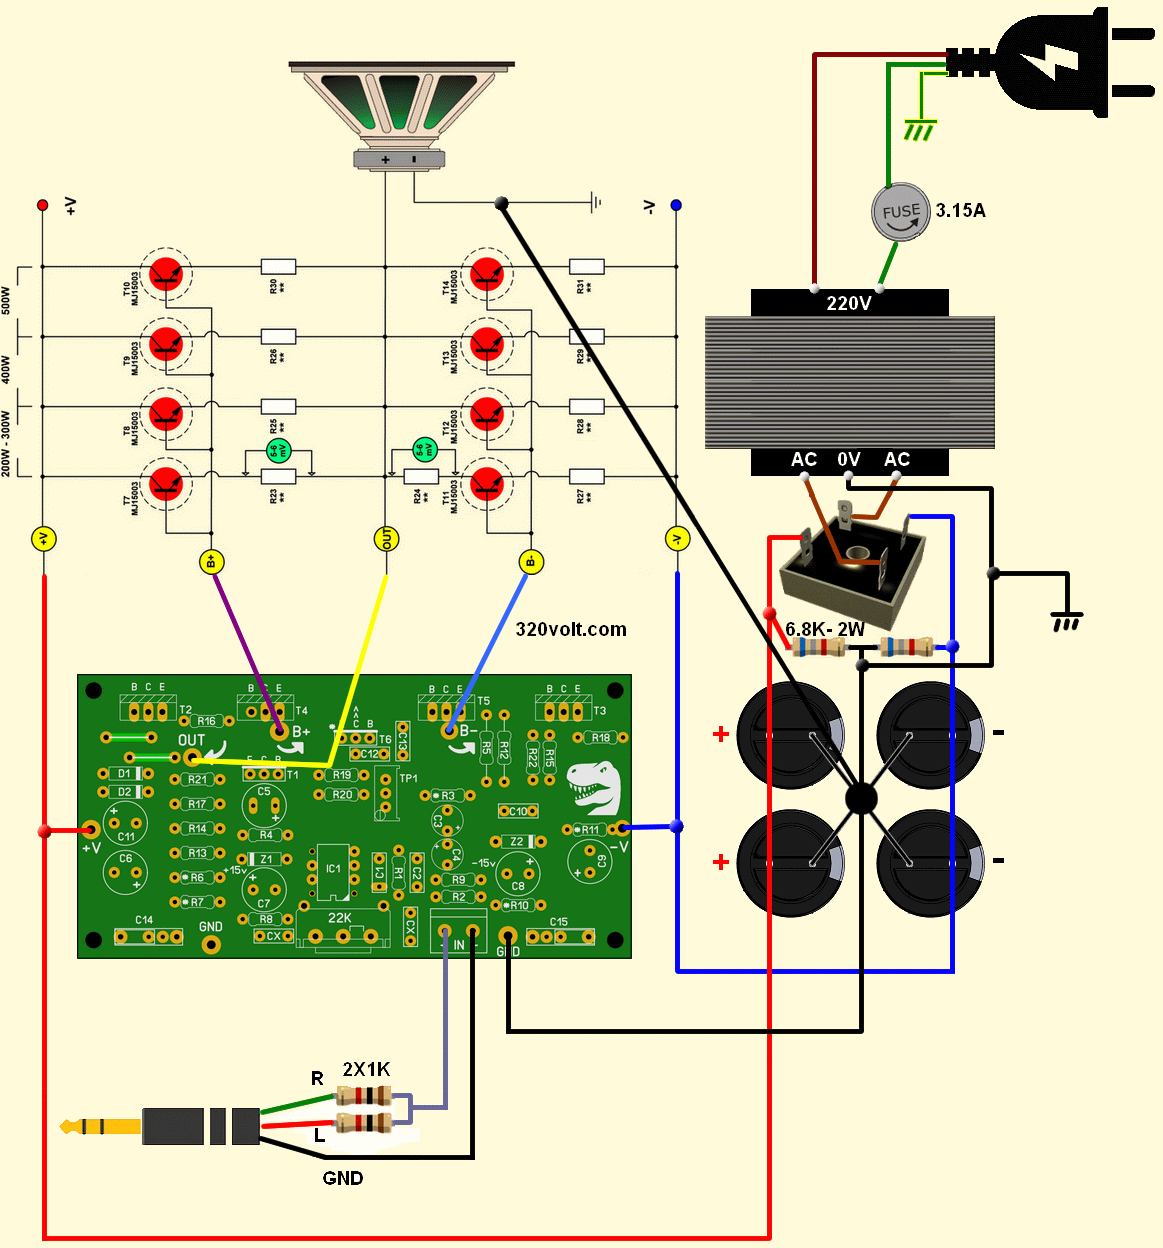 200w-500w-amplifier-power-audio-connection-diagram-star-gnd